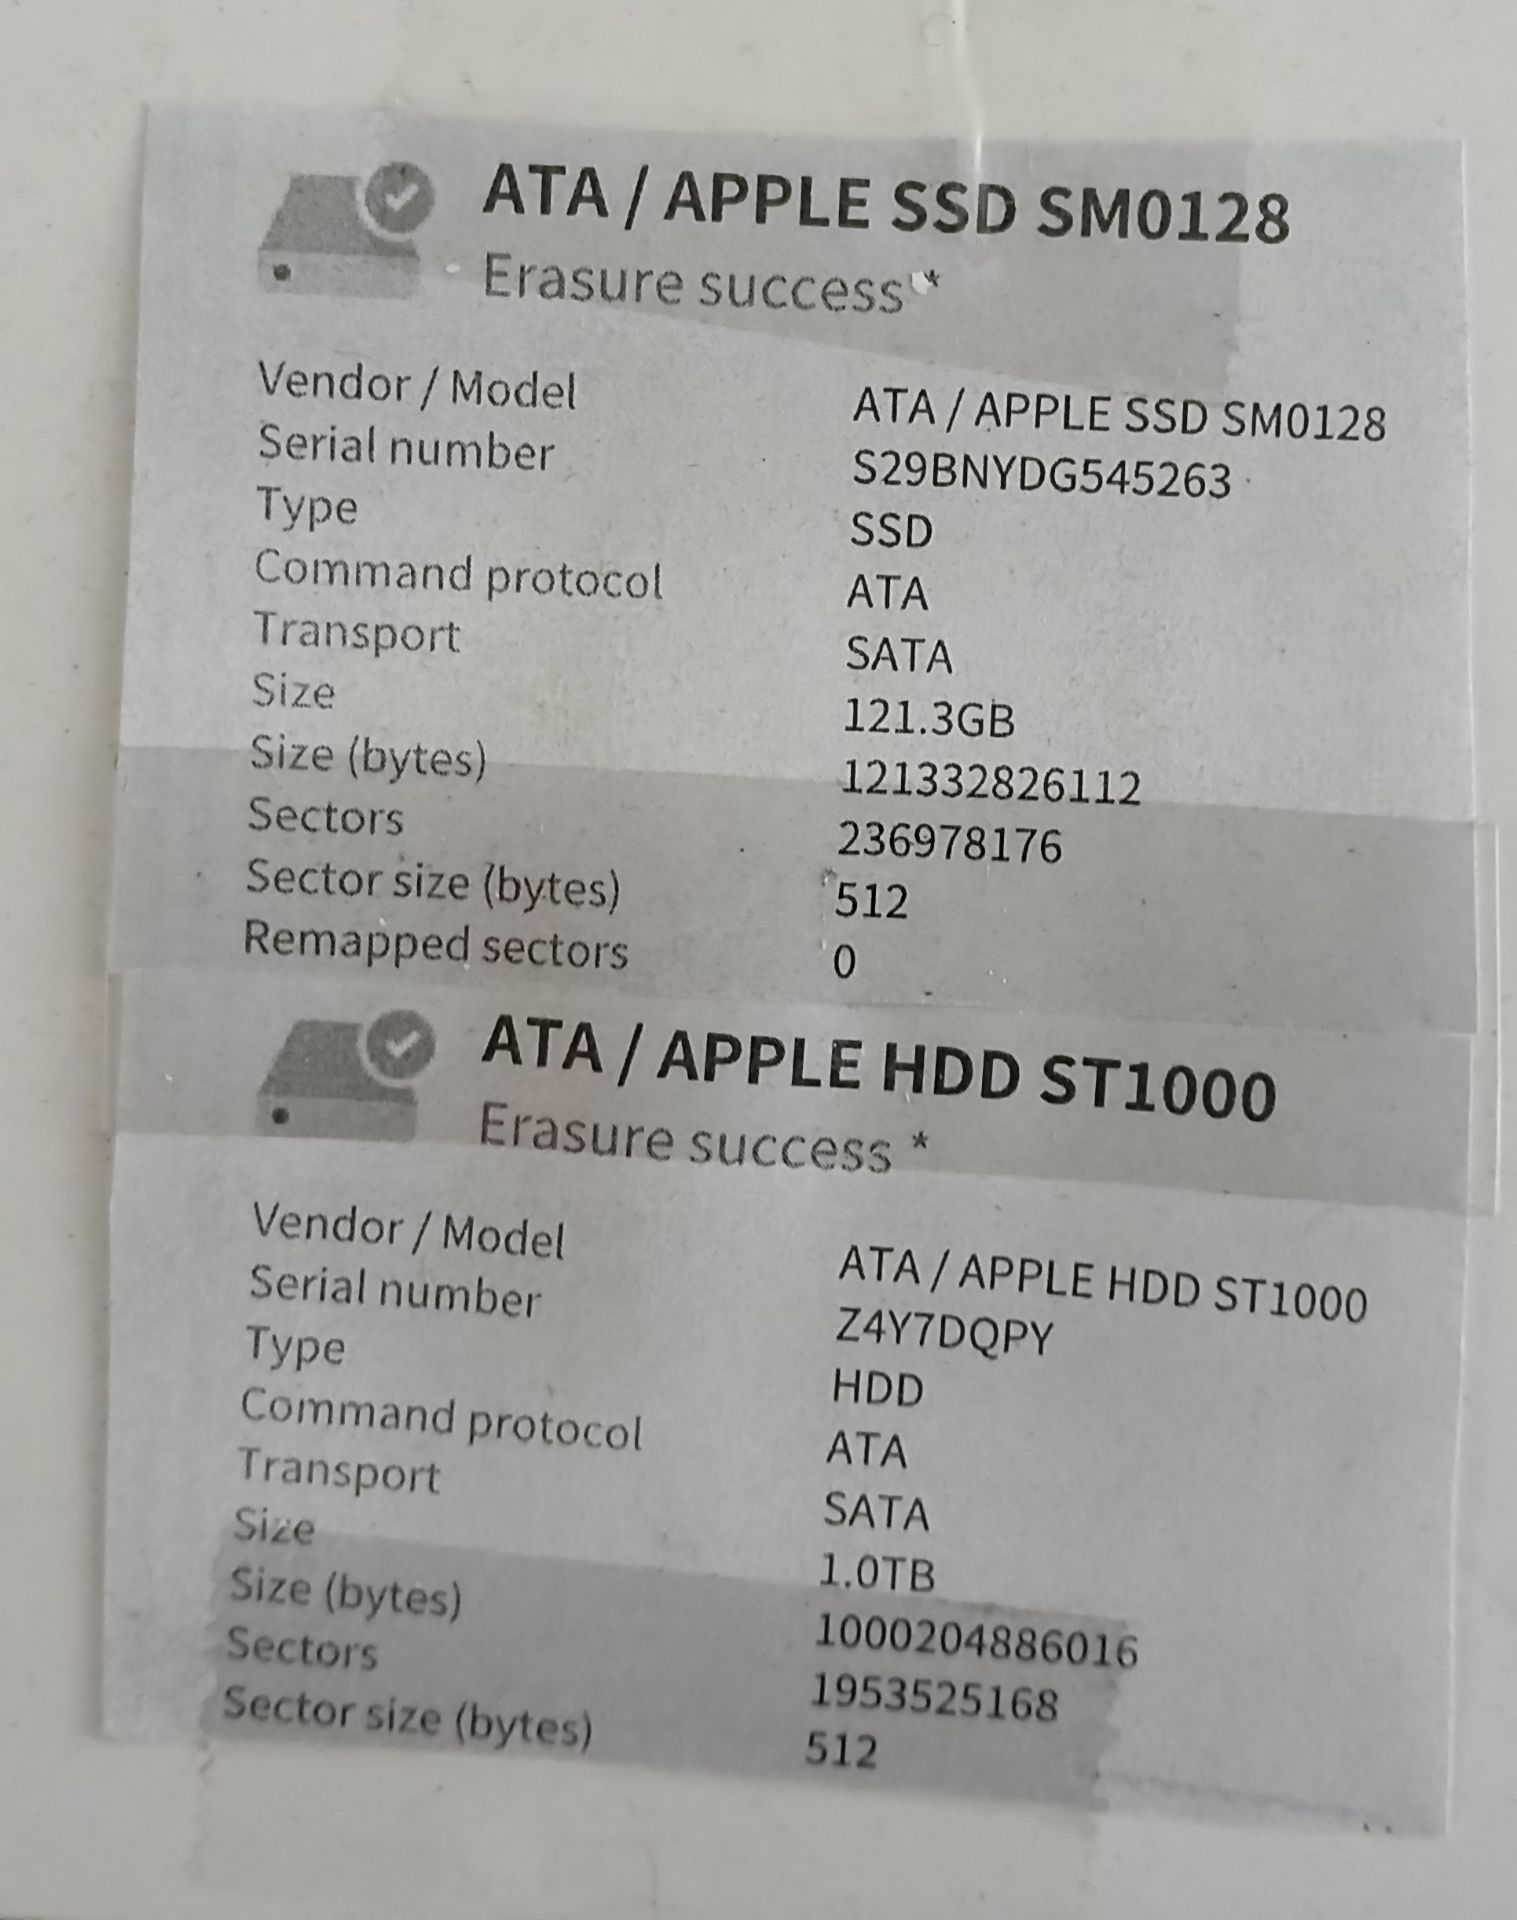 Apple iMac (Retina 5K, 27”, Mid 2015), Serial Number DGKQ306WFY13, with keyboard (No Mouse or - Image 8 of 14